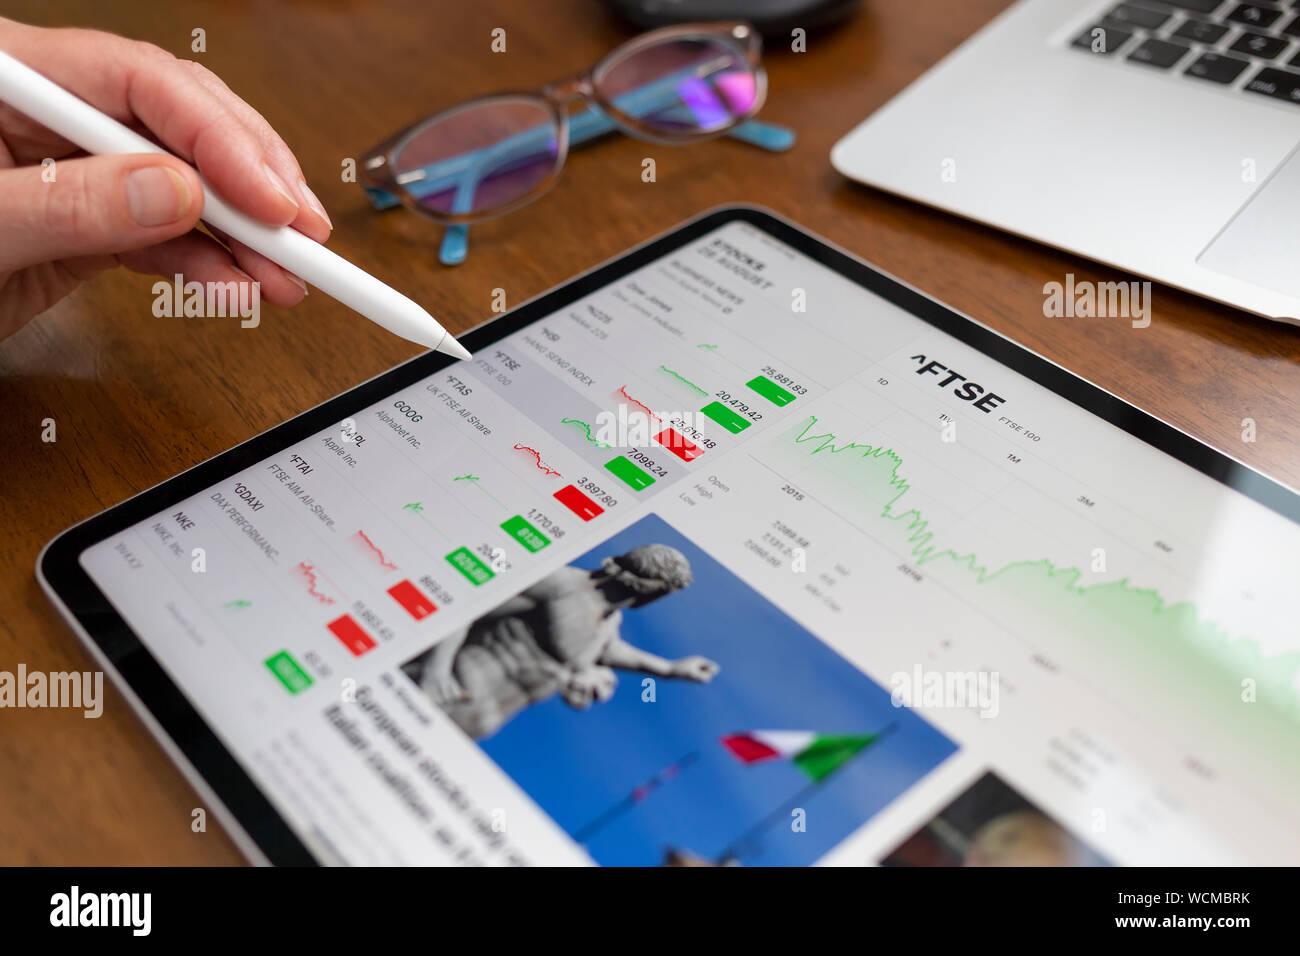 BATH, UK - AUGUST 28, 2019 : An Apple iPad Pro on a desk displaying stock market information using the Apple Stock app. A hand holding an Apple Pencil Stock Photo